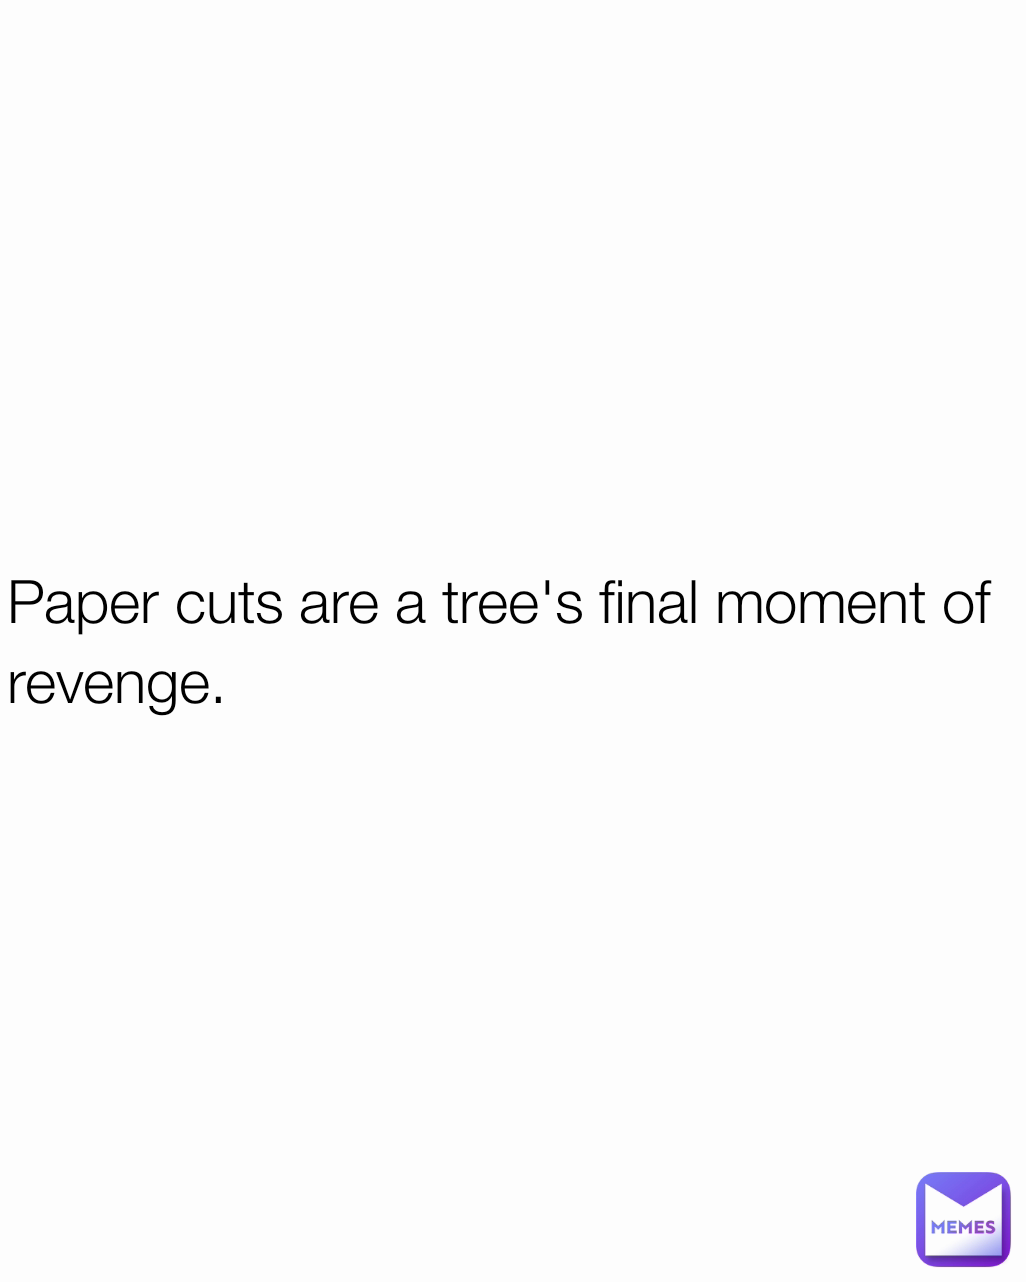 Paper cuts are a tree's final moment of revenge.